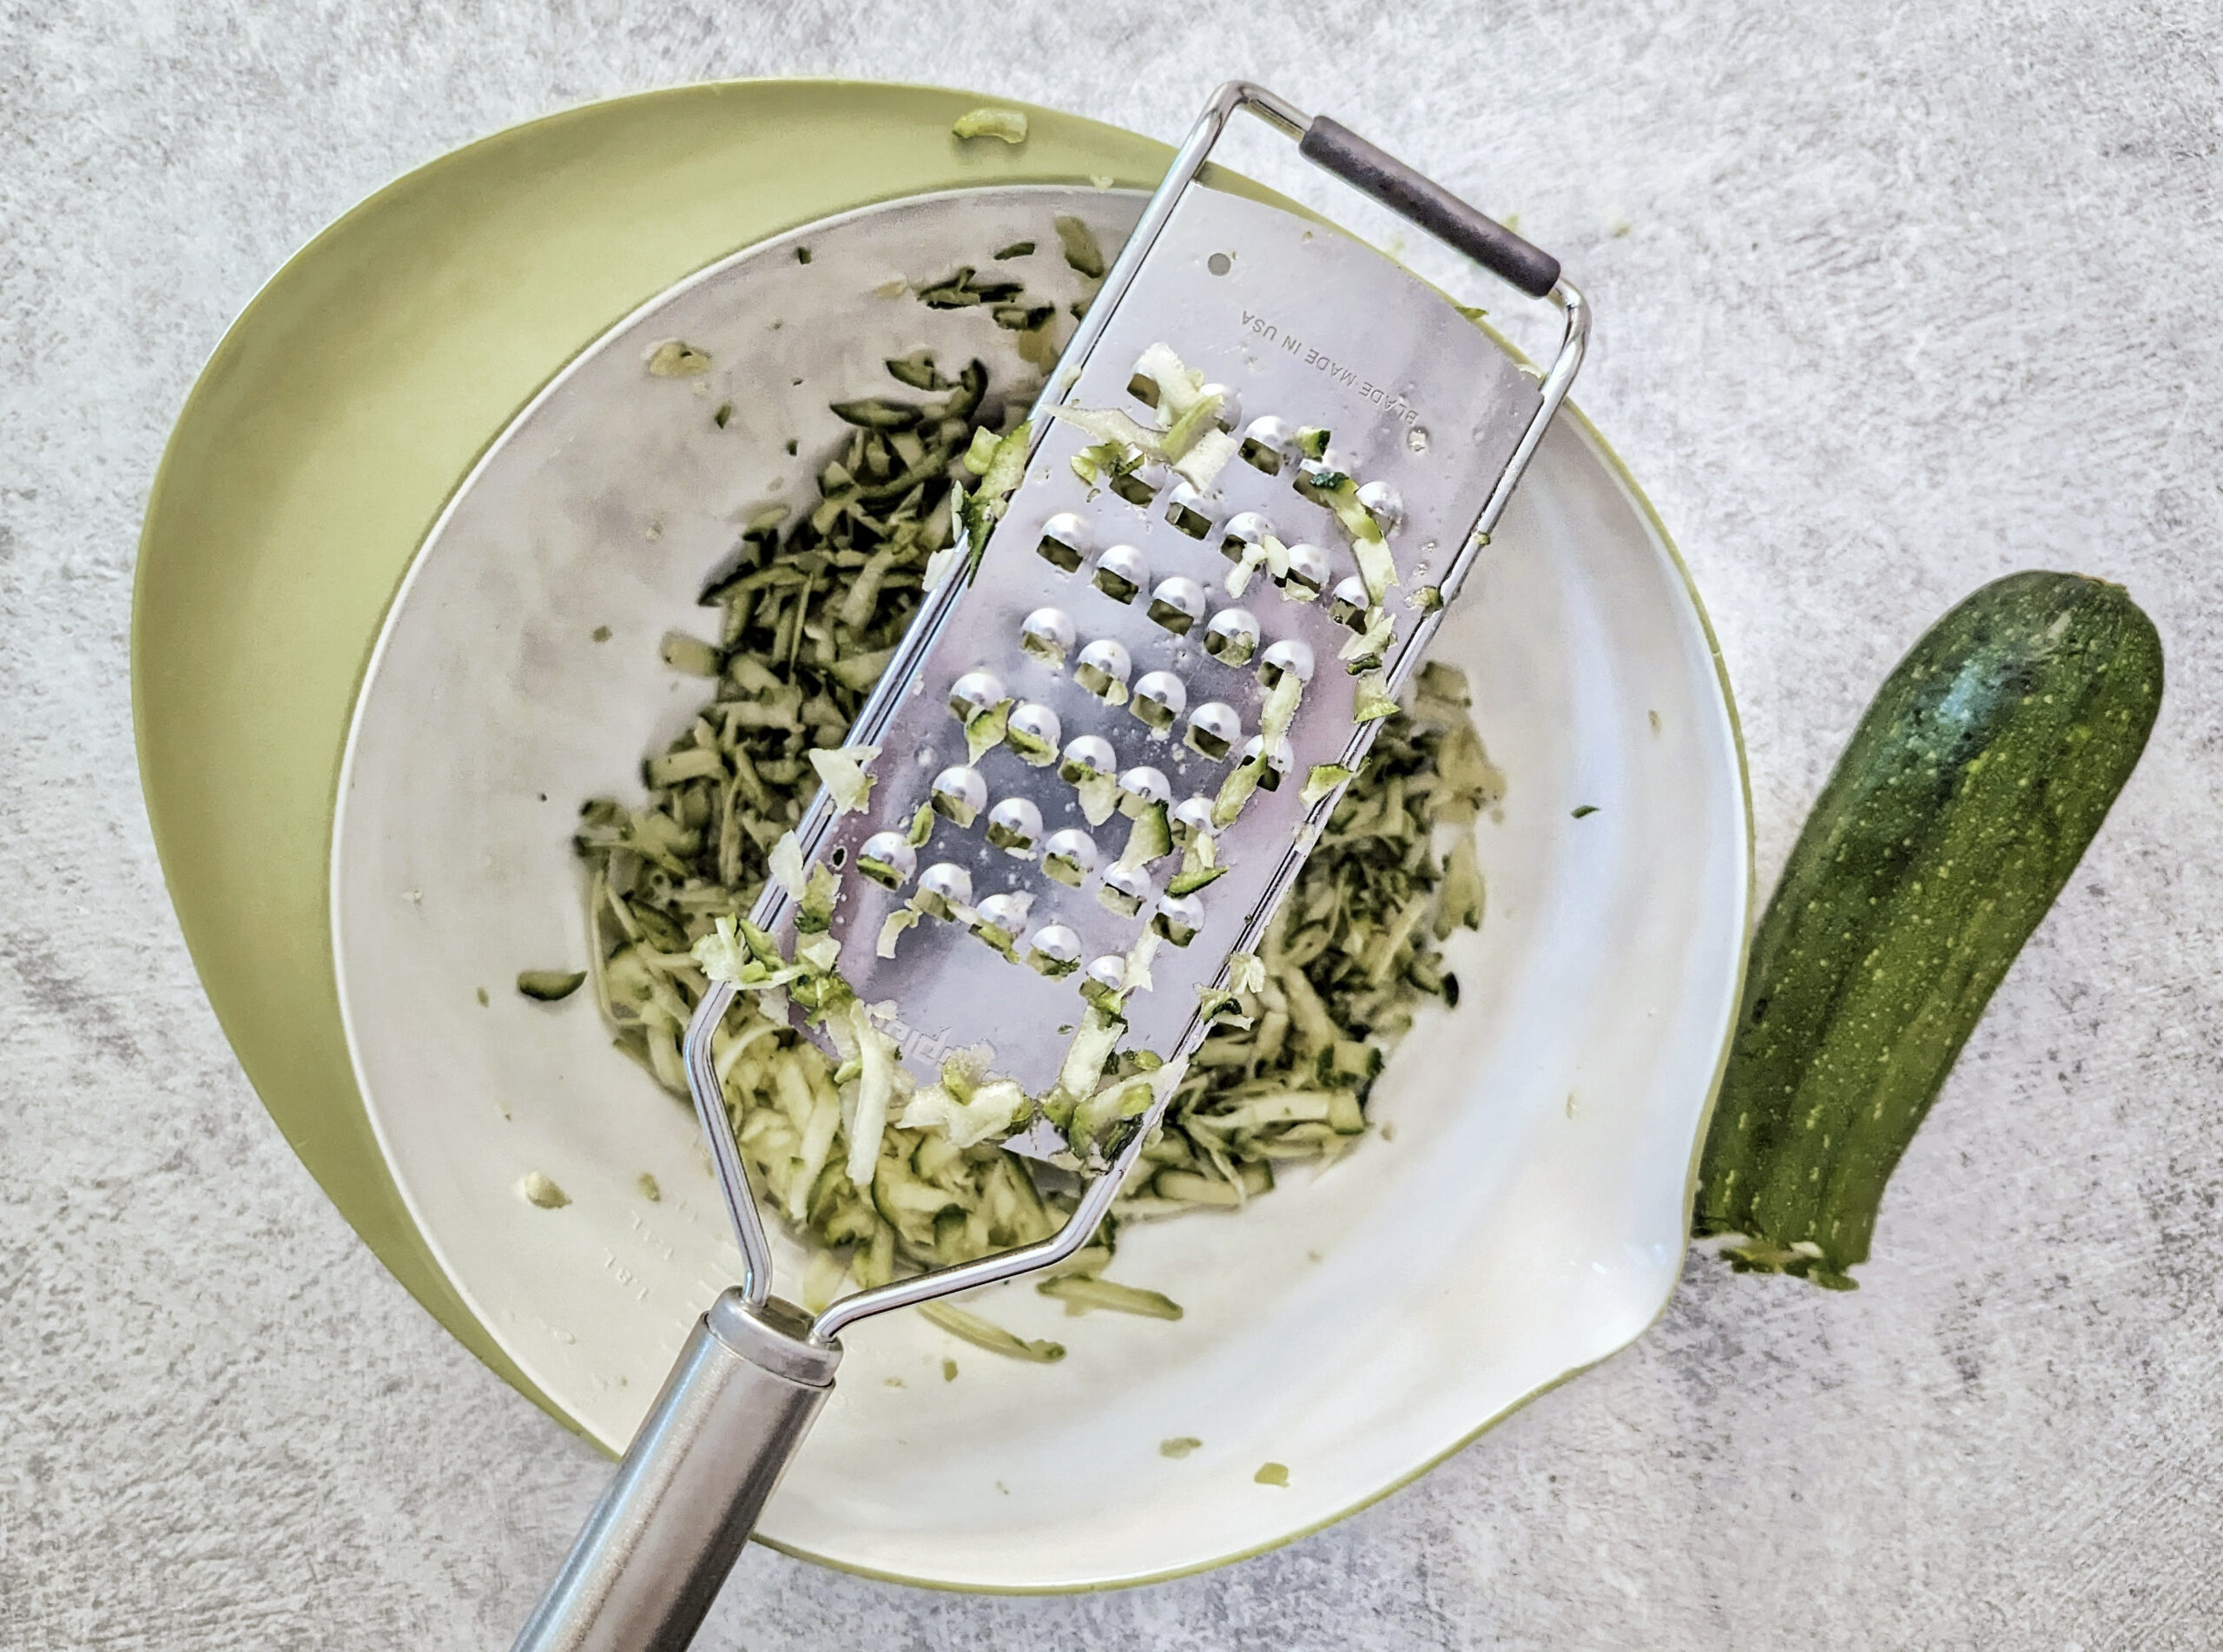 Grate the zucchini into a mixing bowl.